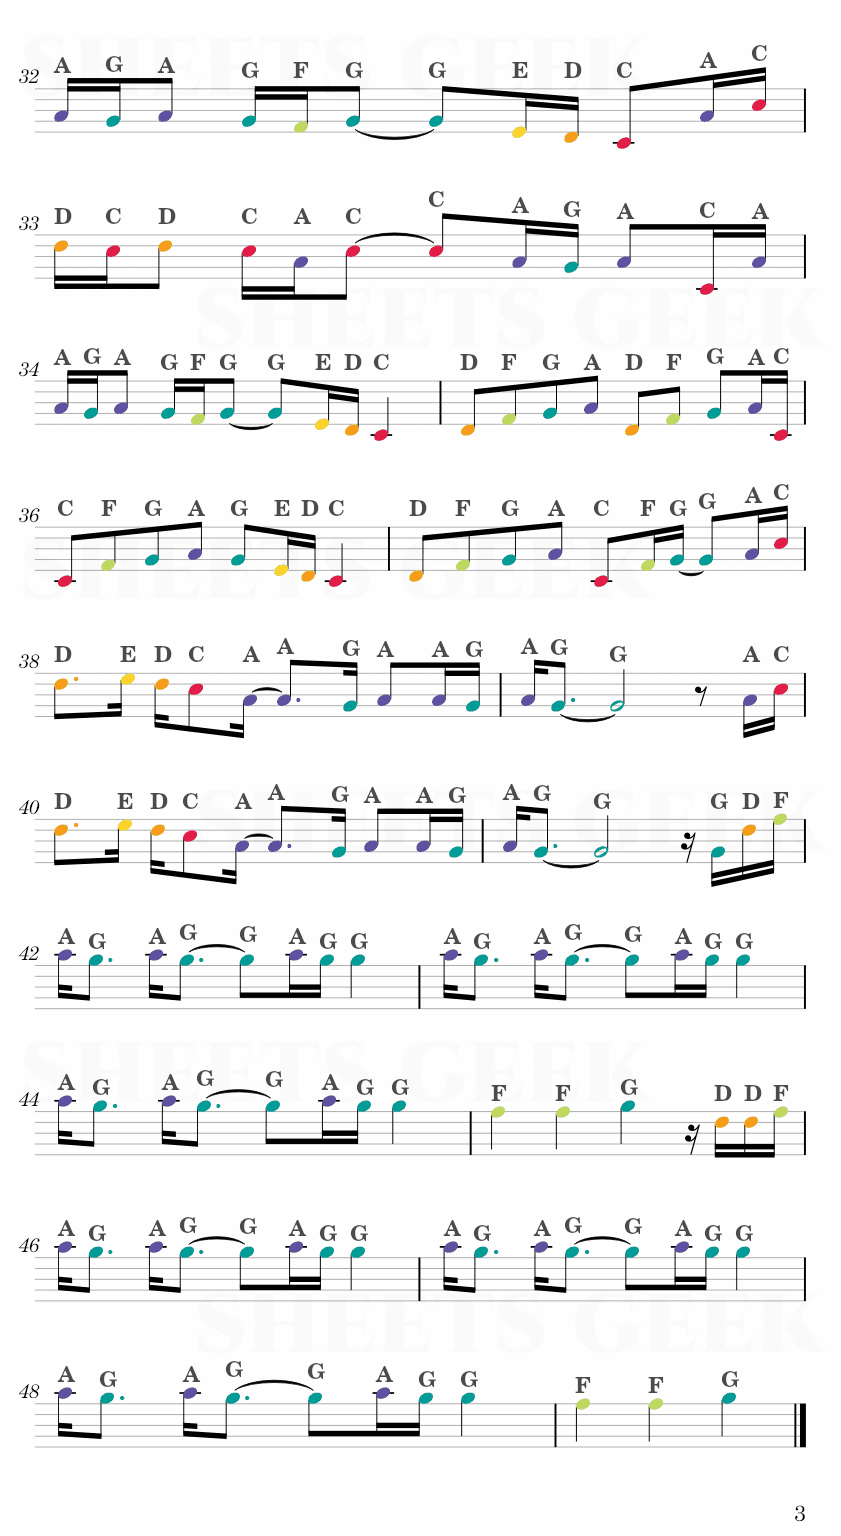 Paradise - Coldplay Easy Sheet Music Free for piano, keyboard, flute, violin, sax, cello page 3